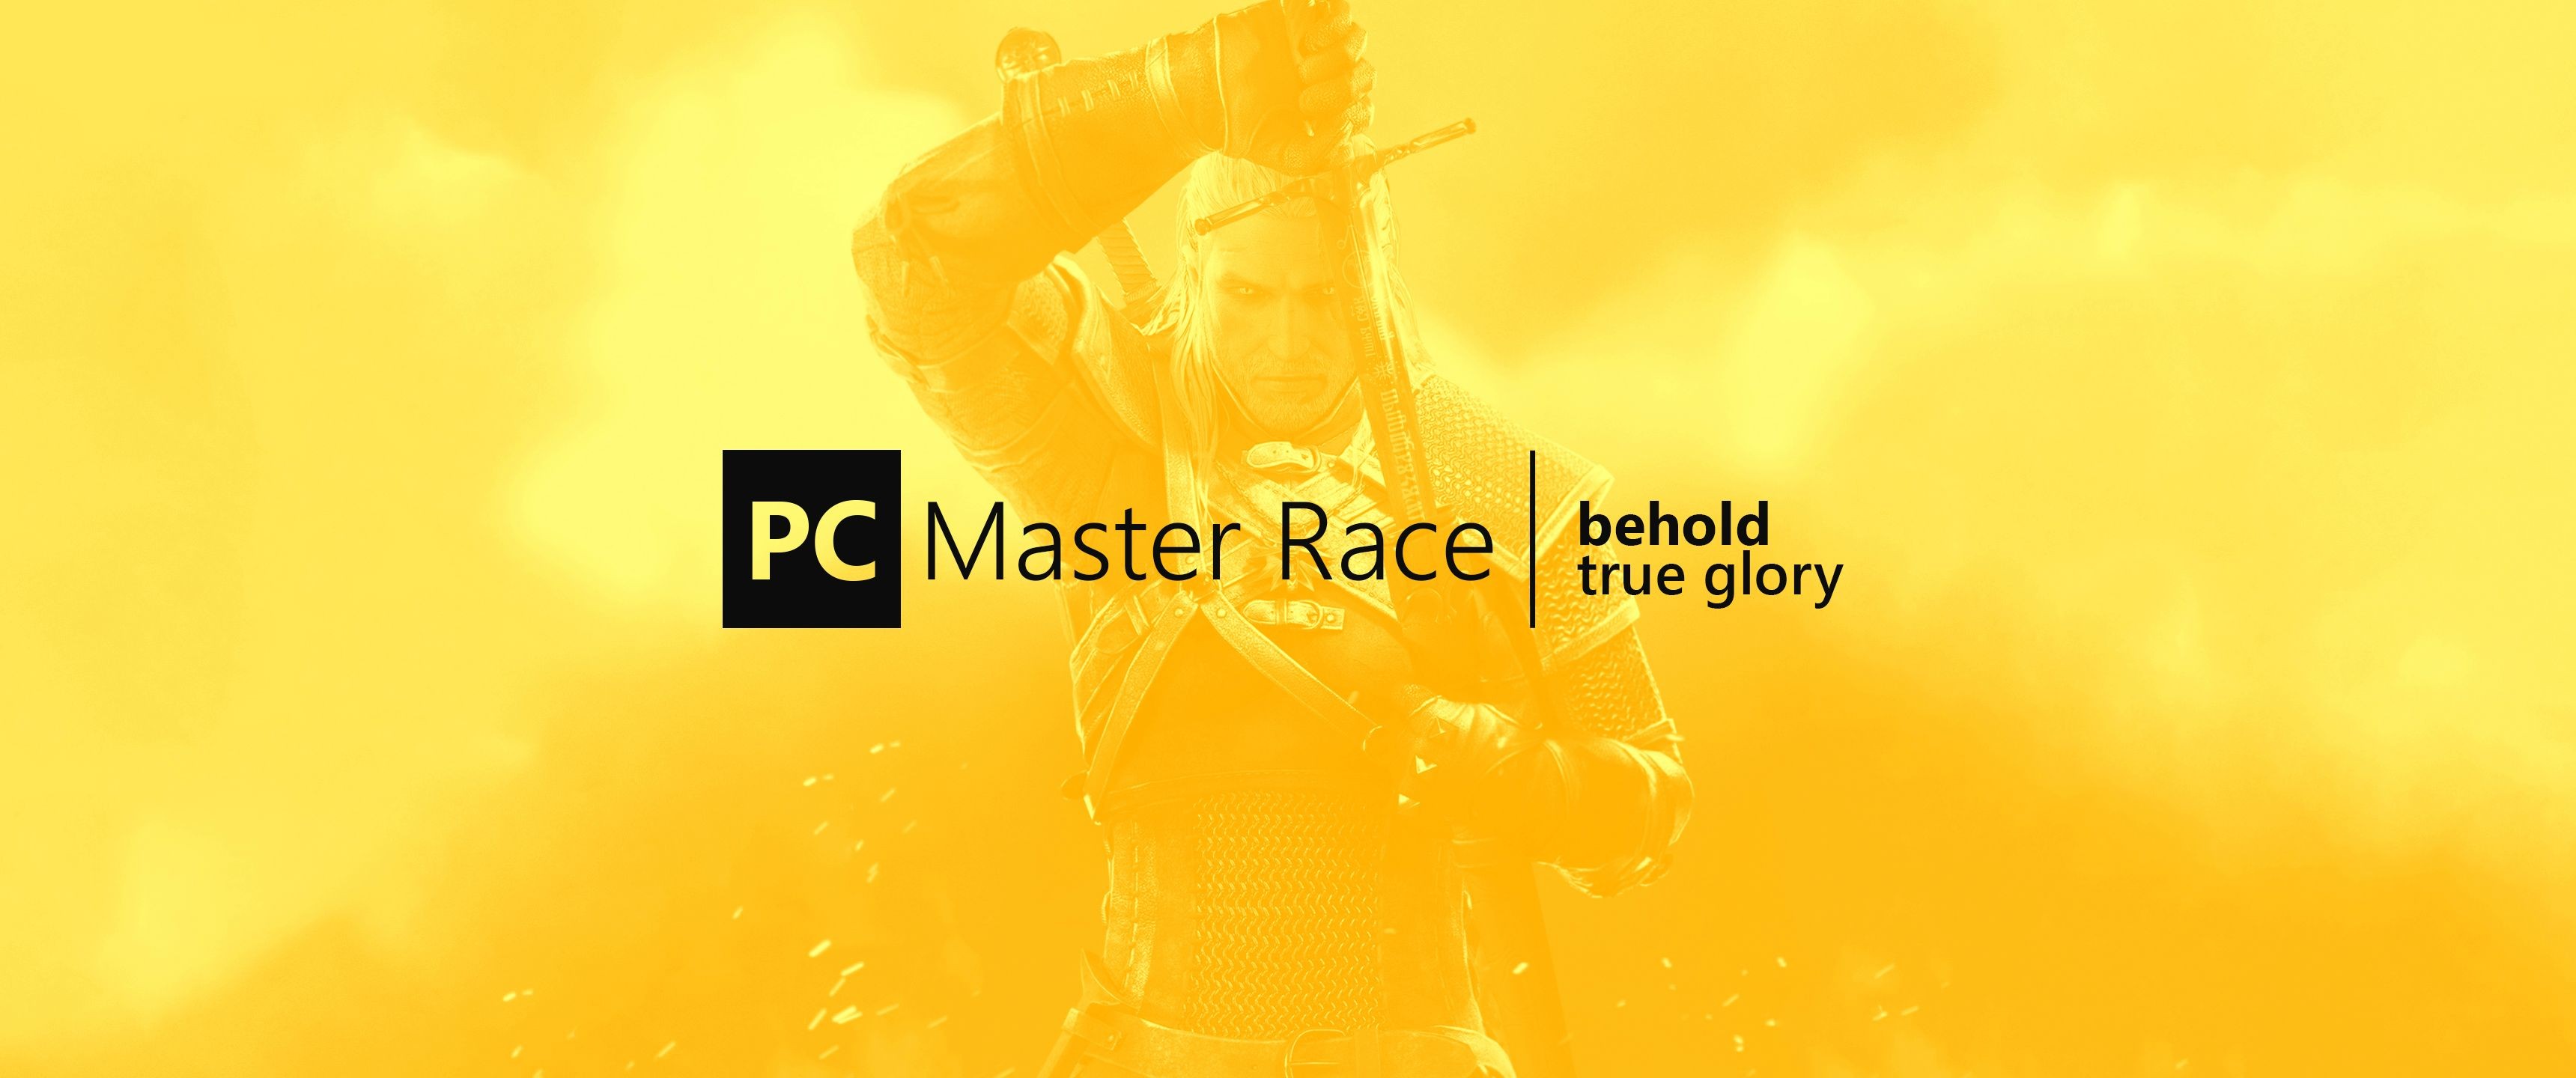 General 3440x1440 PC Master  Race PC gaming Geralt of Rivia The Witcher The Witcher 3: Wild Hunt video games yellow background